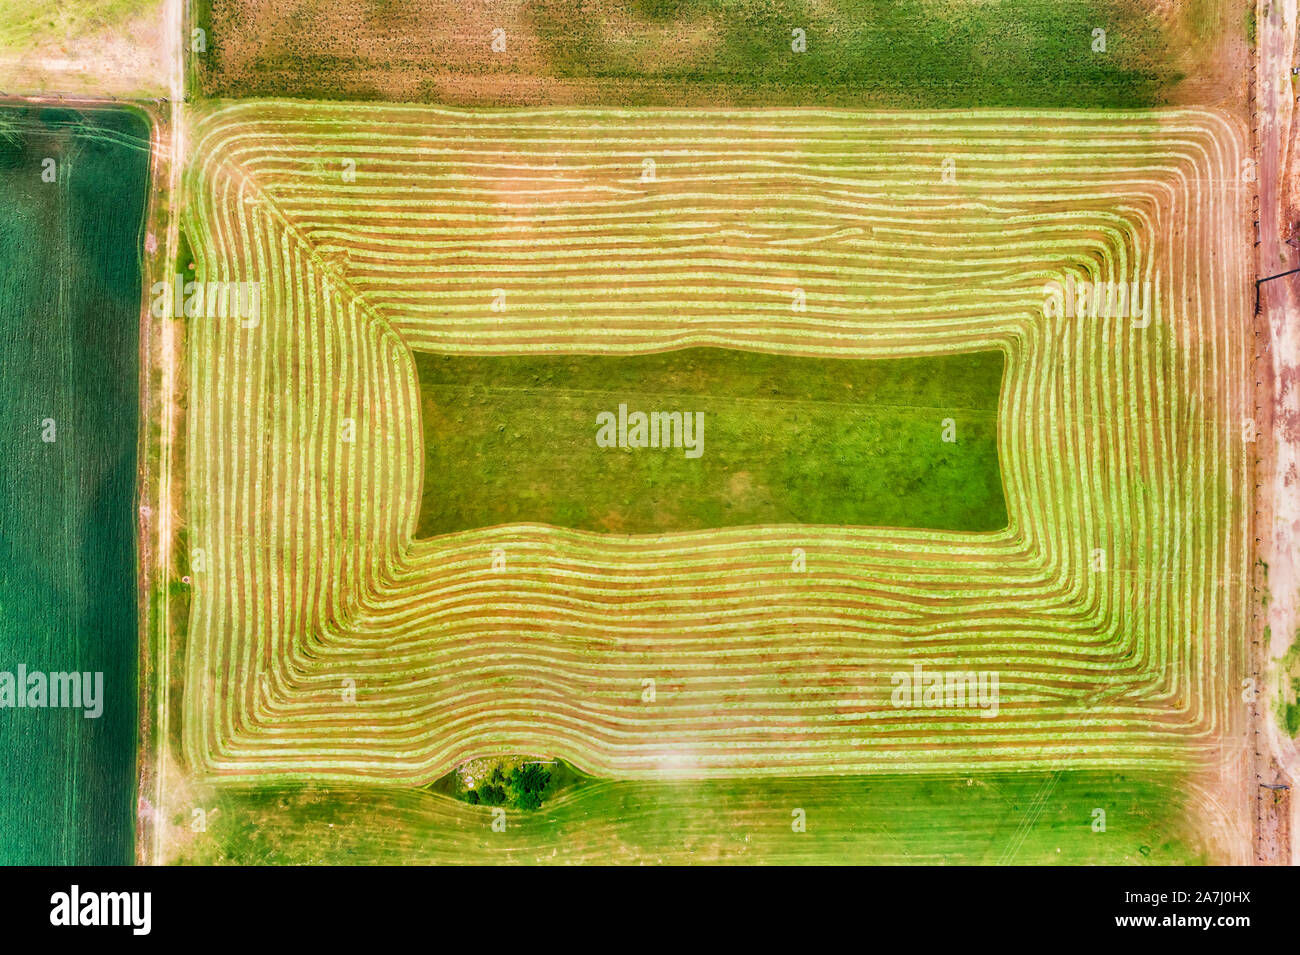 Green regtangle on cultivated farm with crops and plants growing in controlled rows. Shades of green in a farm field seen from above top down. Stock Photo